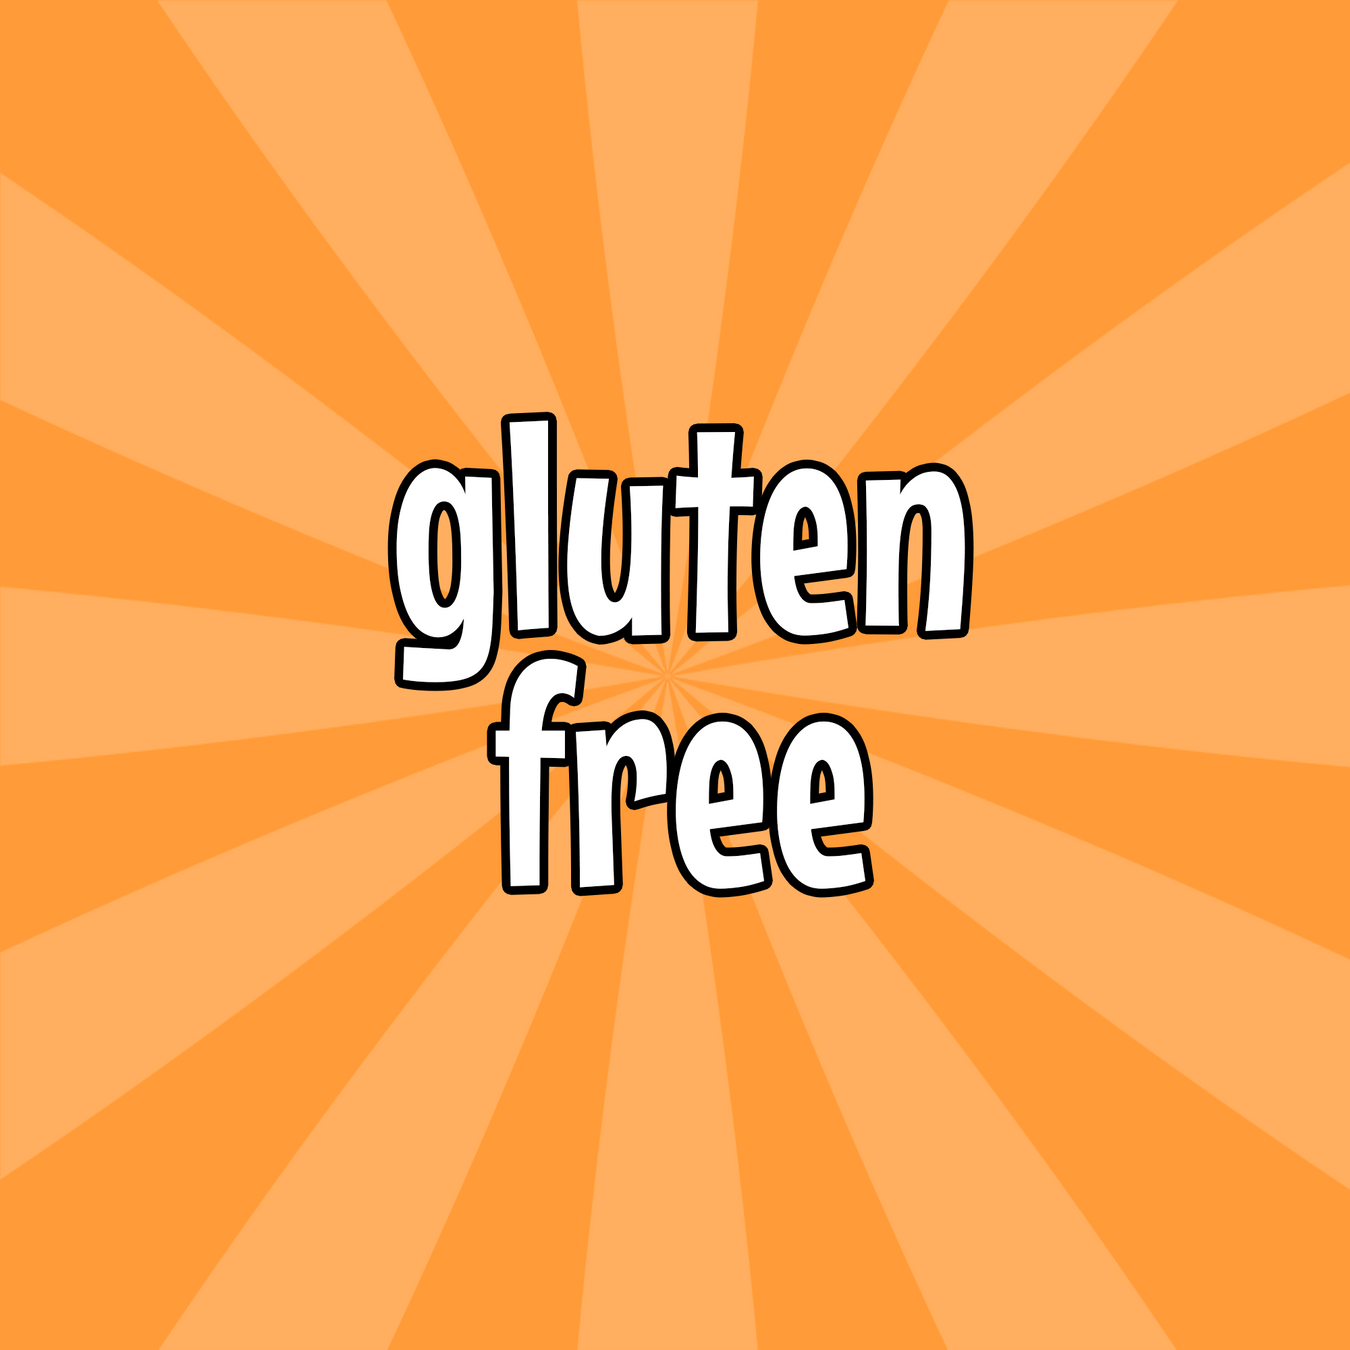 GLUTEN-FREE, Sugarfree, Diabetic, Low Carb, Keto, and Banting Products